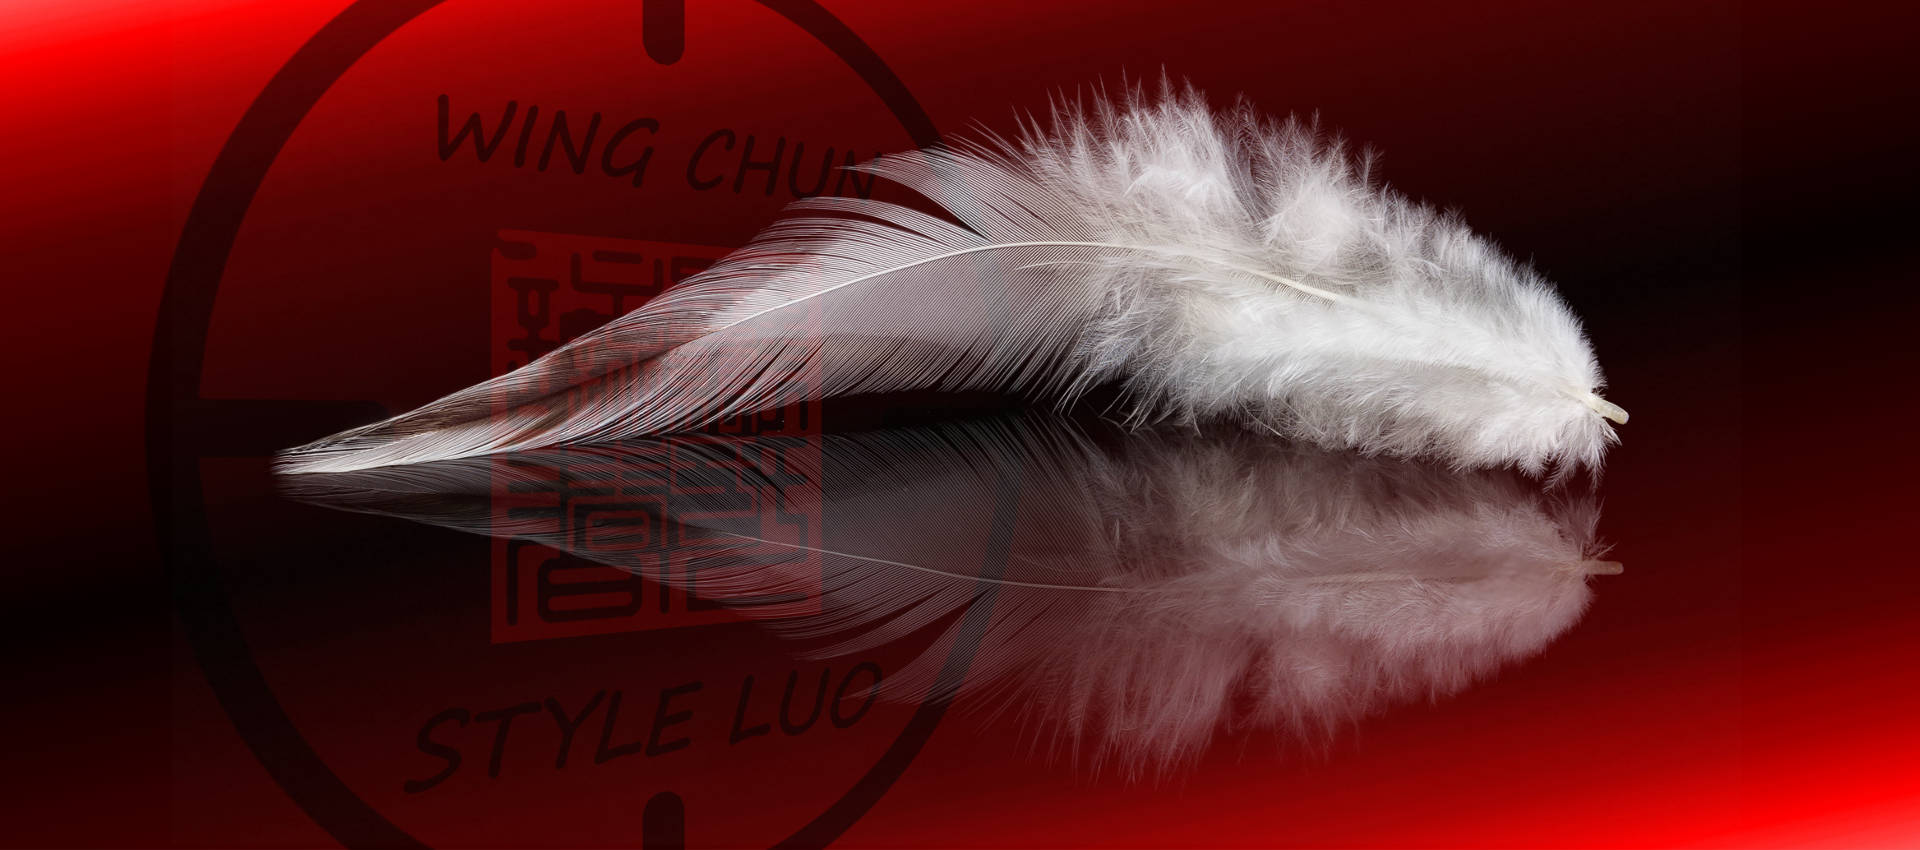 Wallpaper Wing Chun Luo - Feather